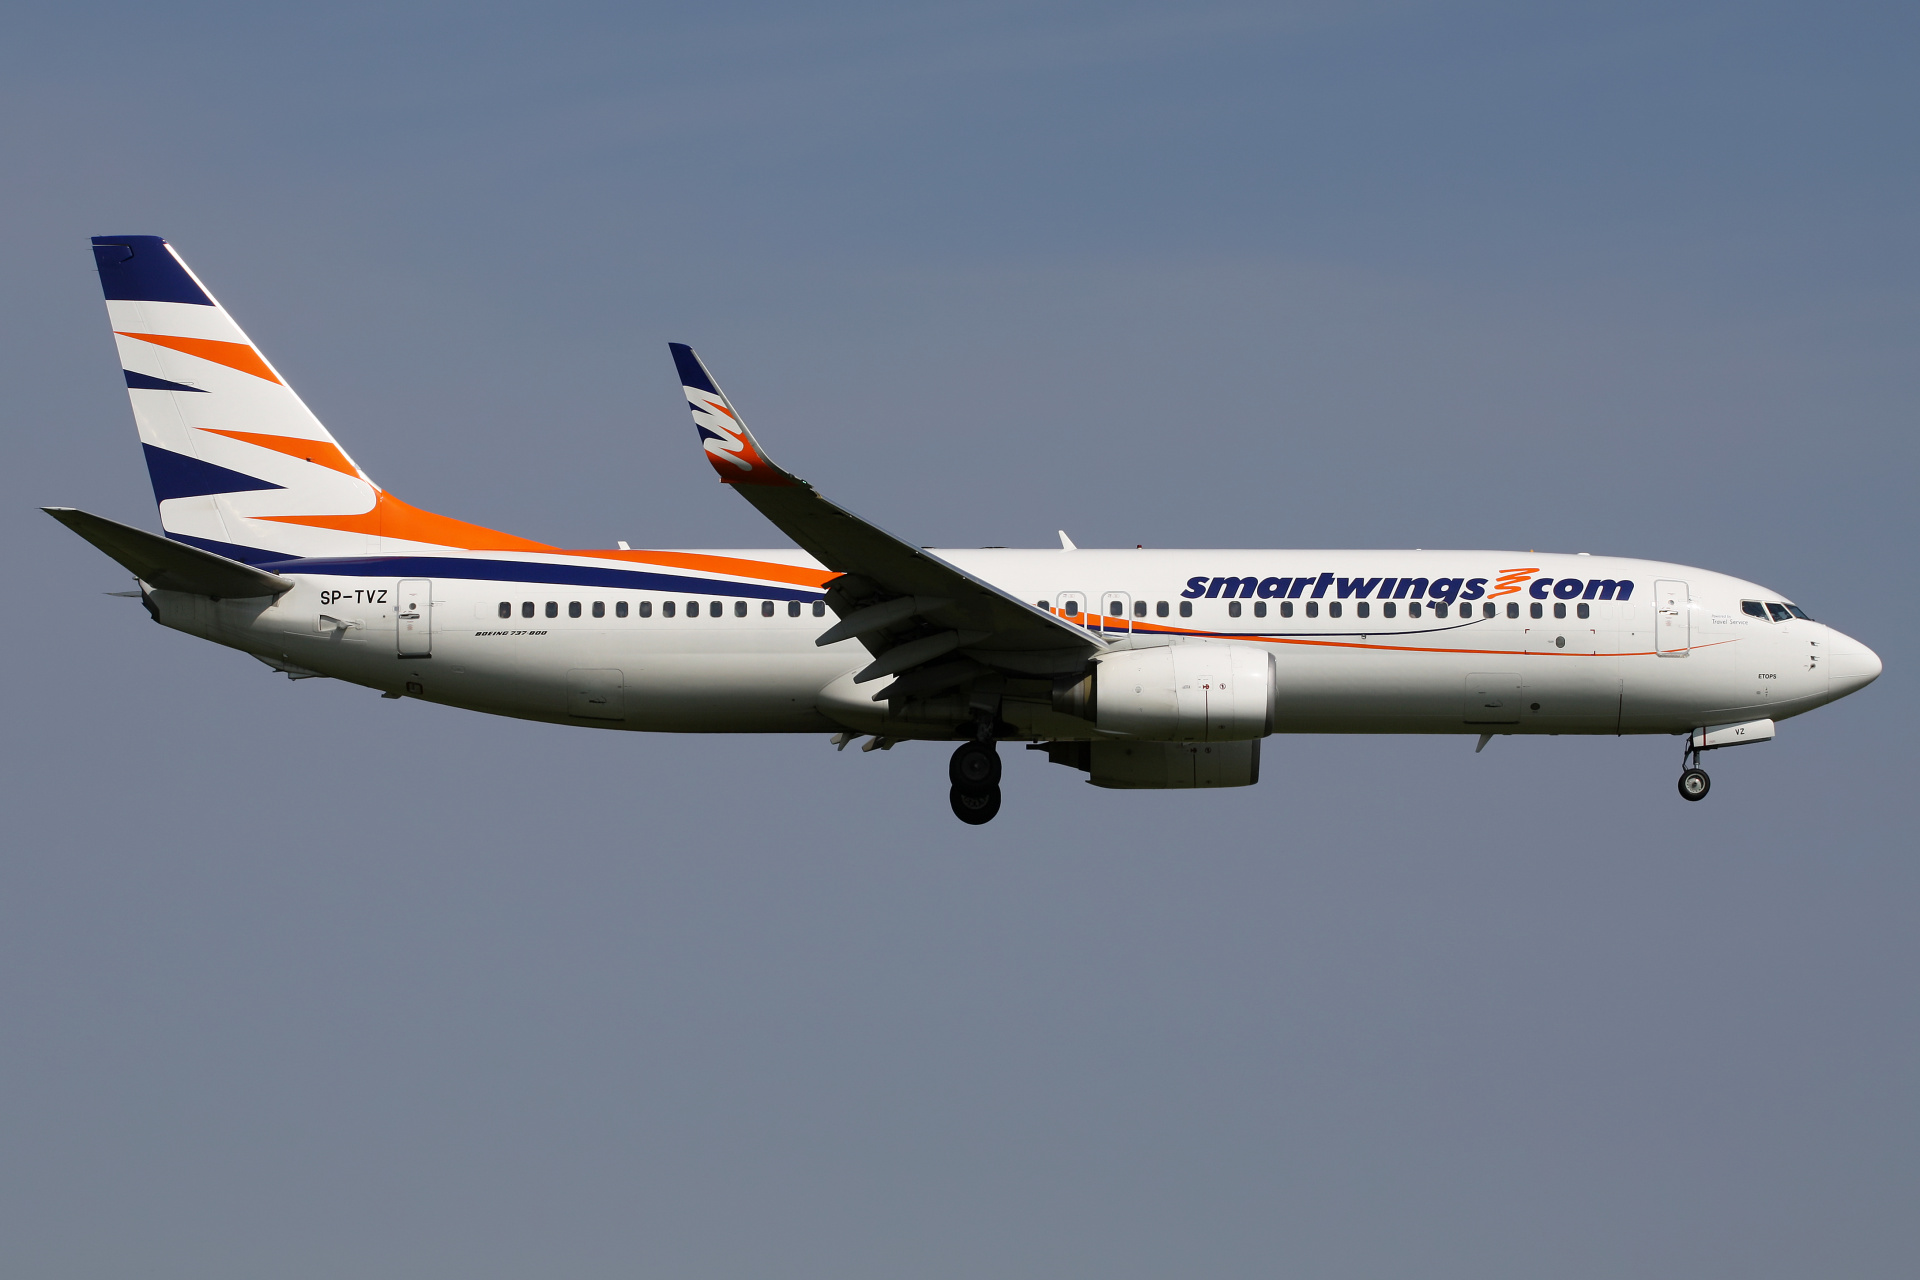 SP-TVZ (Aircraft » EPWA Spotting » Boeing 737-800 » SmartWings)